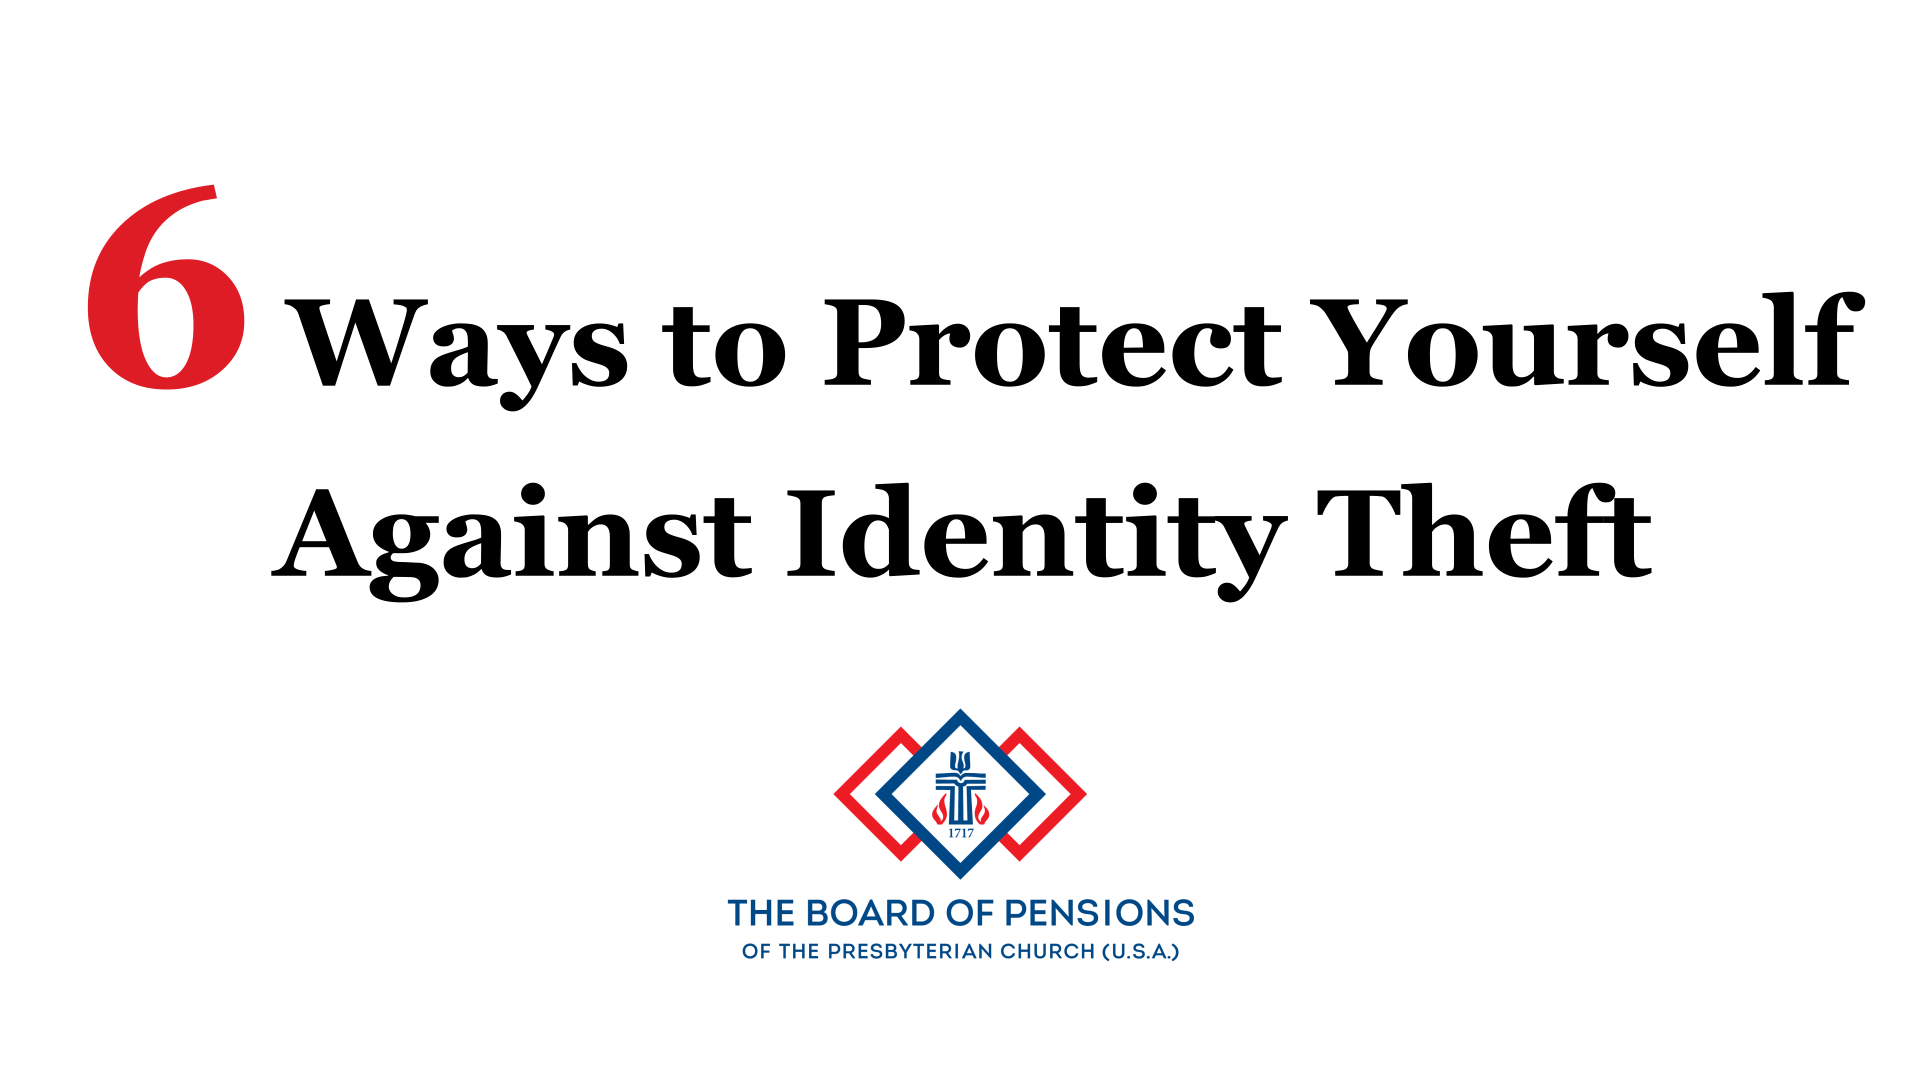 6 Ways to Protect Yourself Against Identity Theft